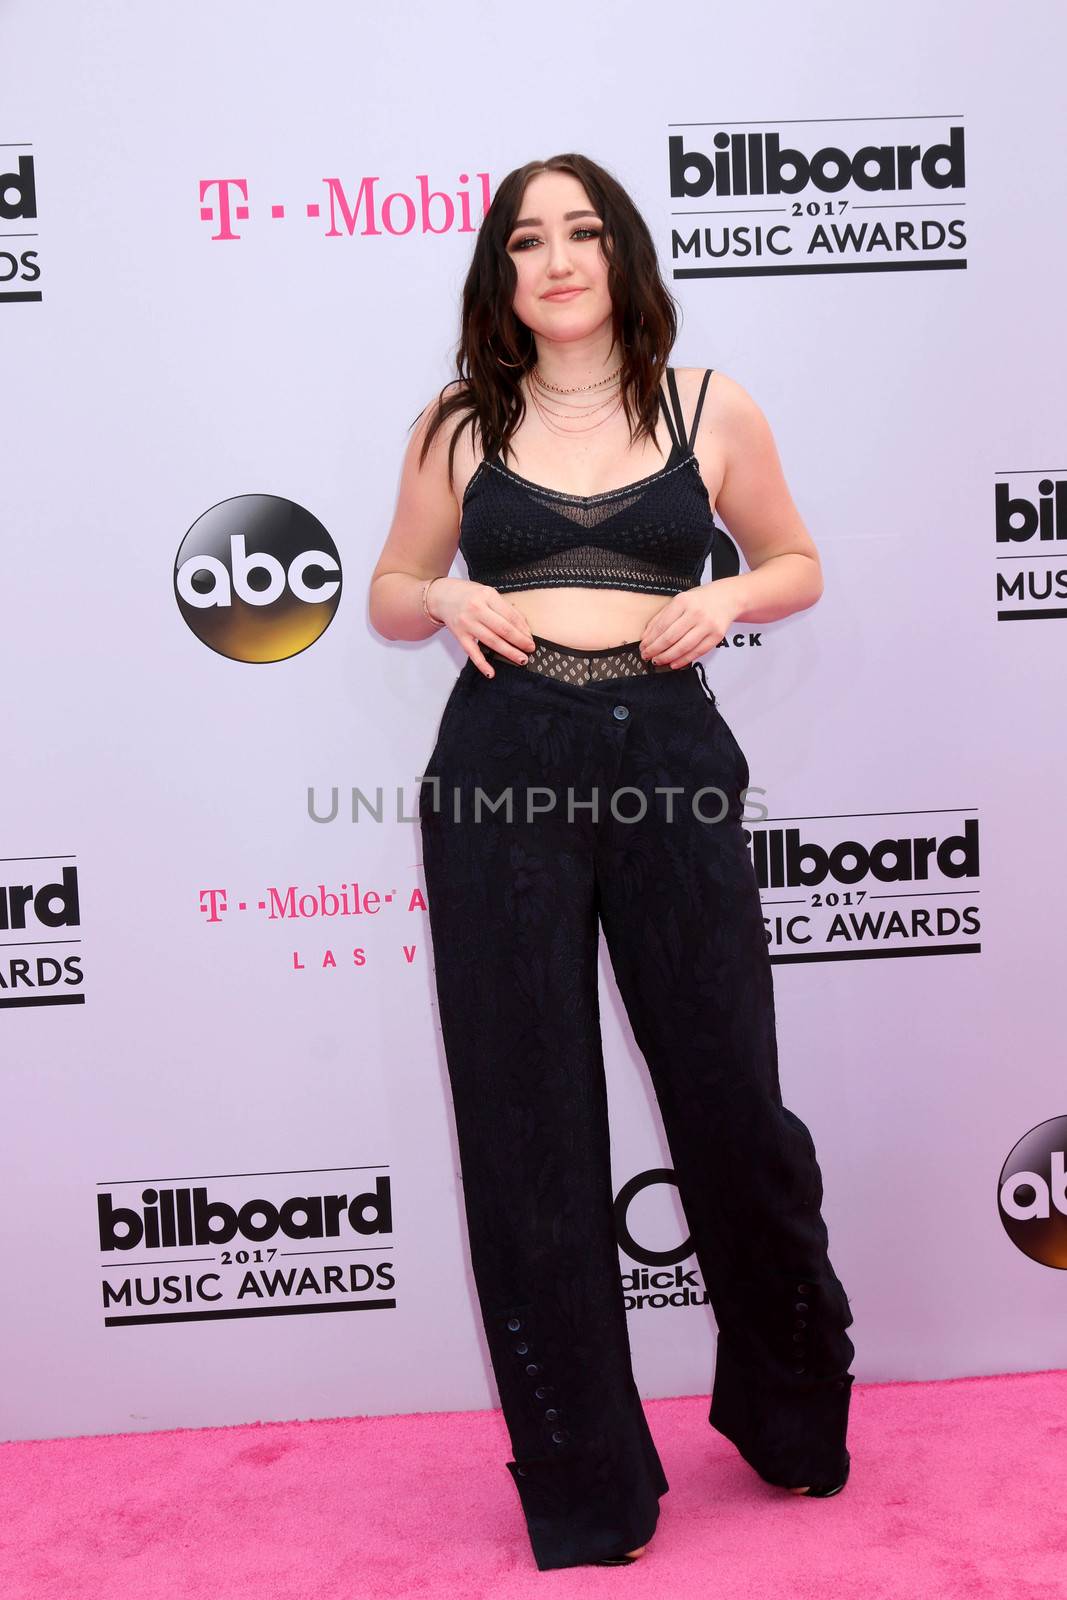 Noah Cyrus
at the 2017 Billboard Awards Arrivals, T-Mobile Arena, Las Vegas, NV 05-21-17/ImageCollect by ImageCollect